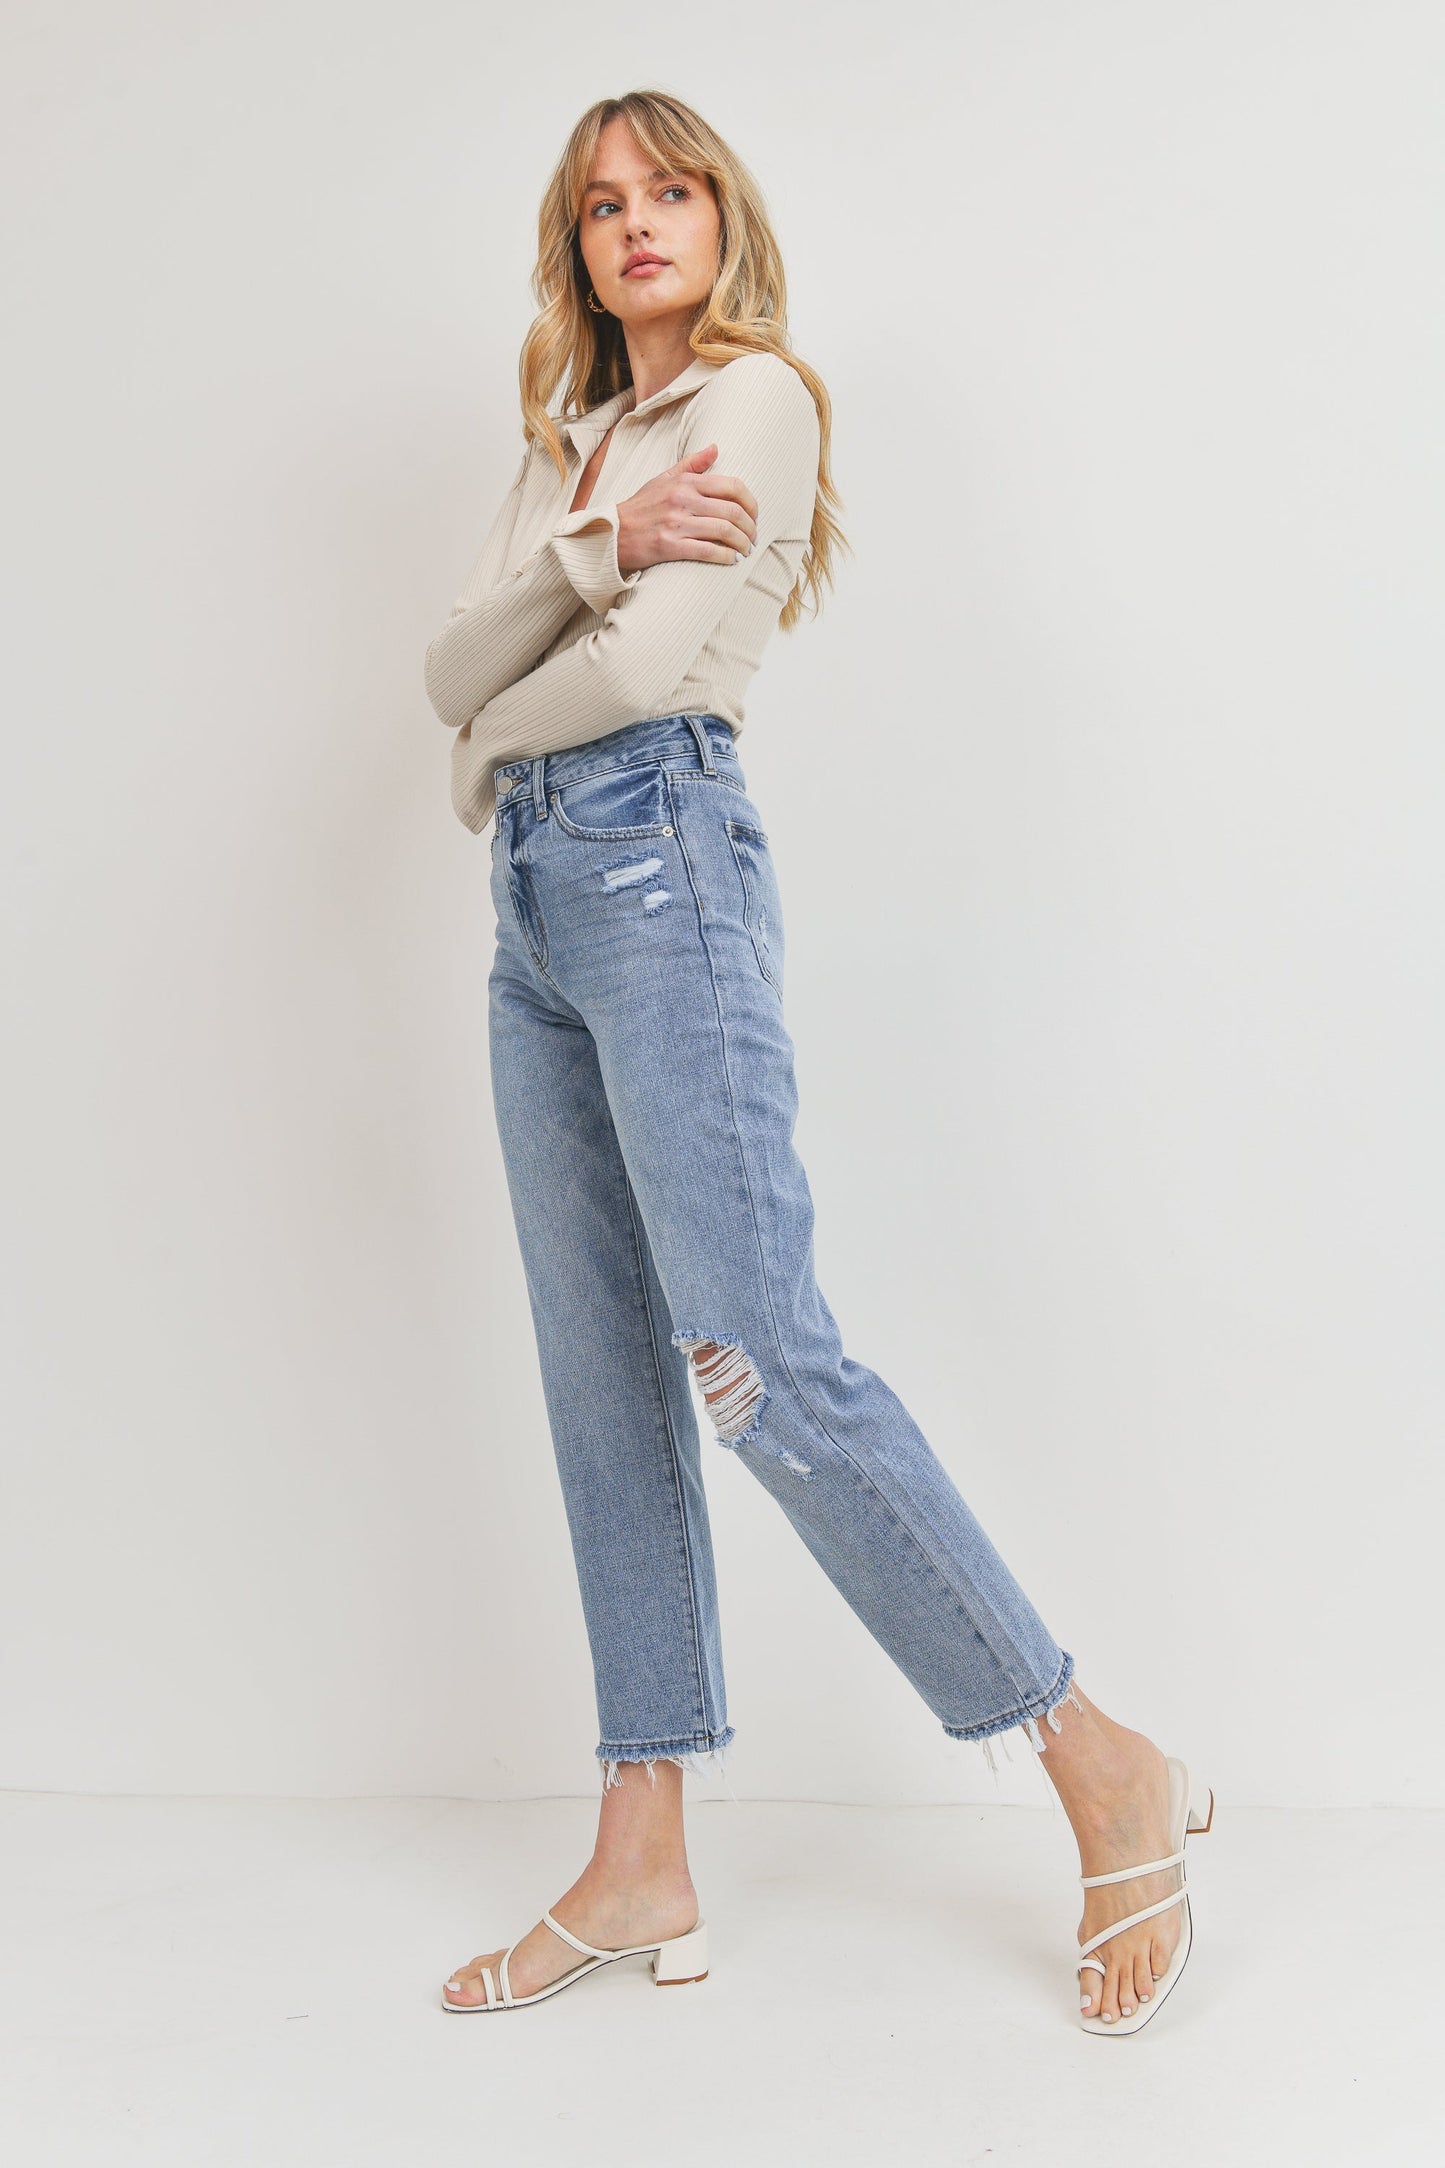 Relaxed Fit Jeans with One Knee Destruction - Casual & Edgy Denim